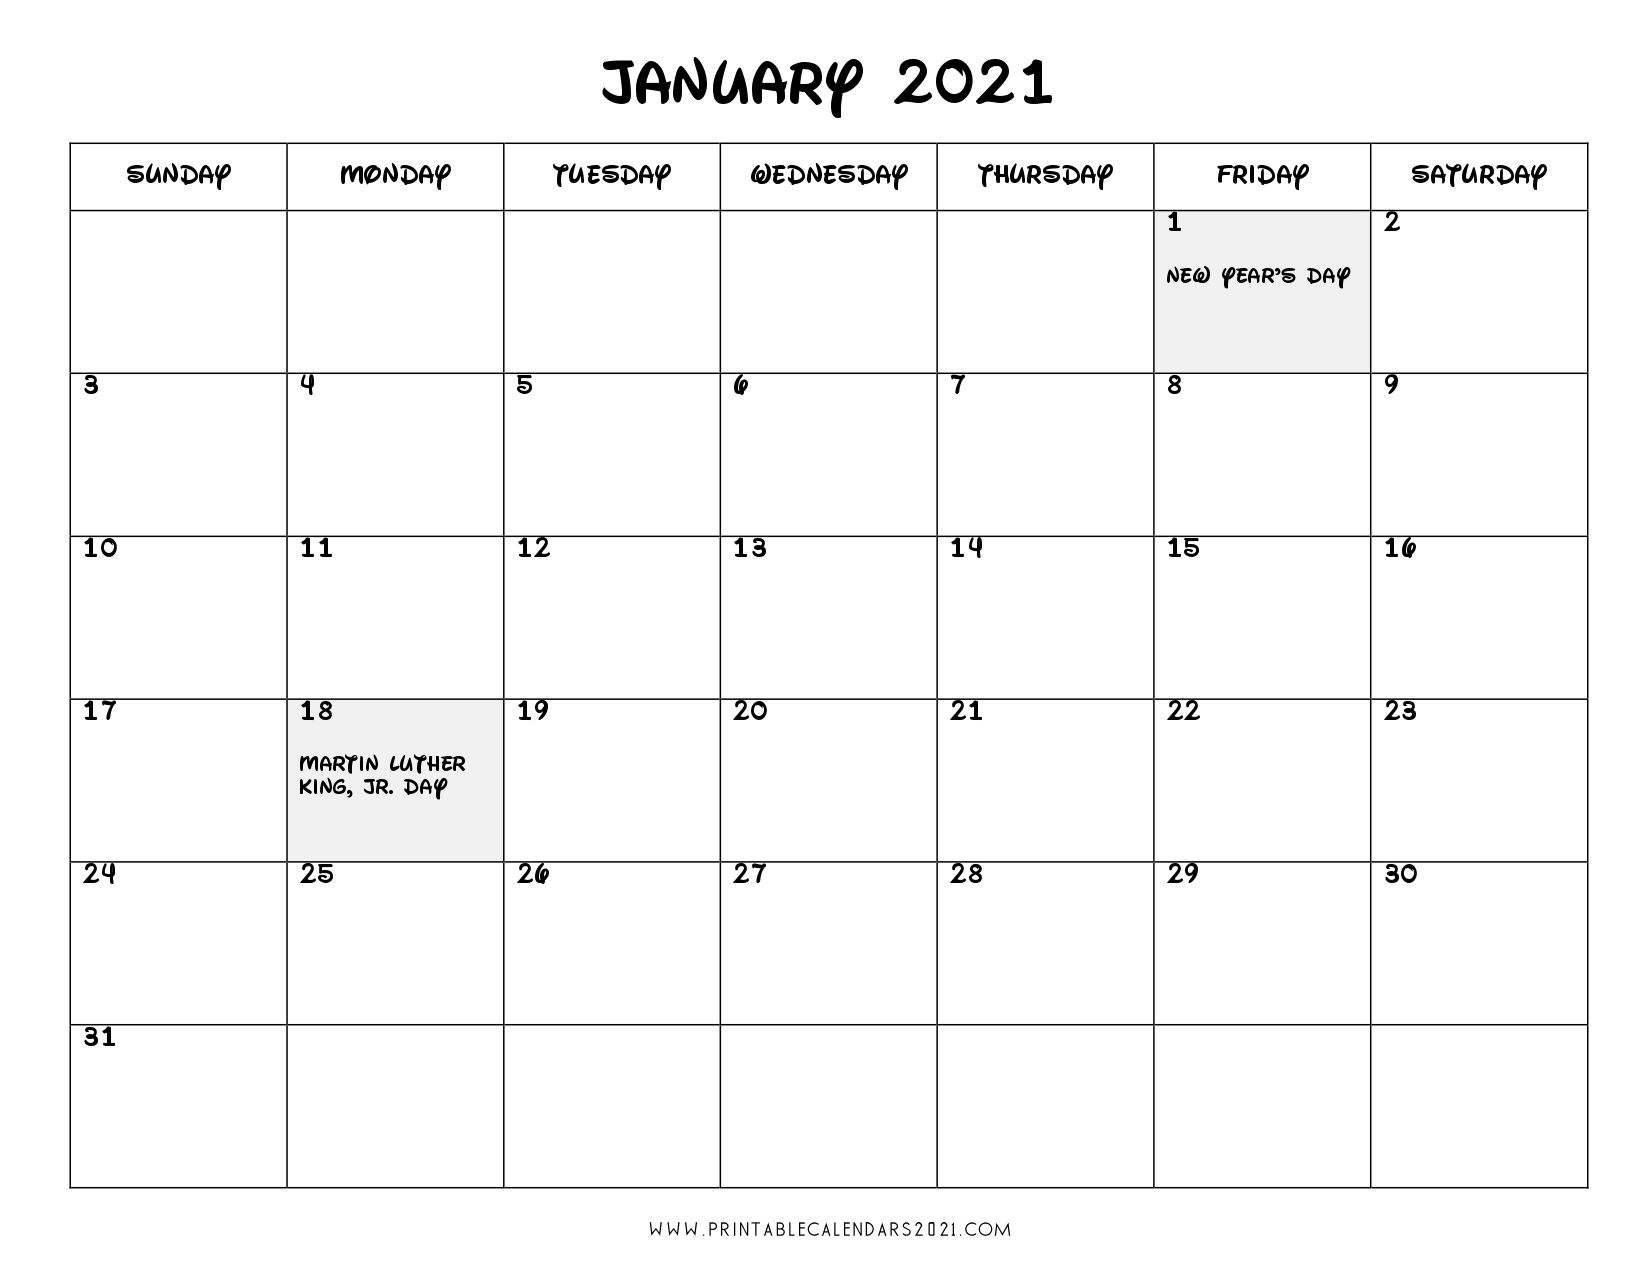 2021 Calendar One Month Per Page Us Holidays 12 Month Pdf